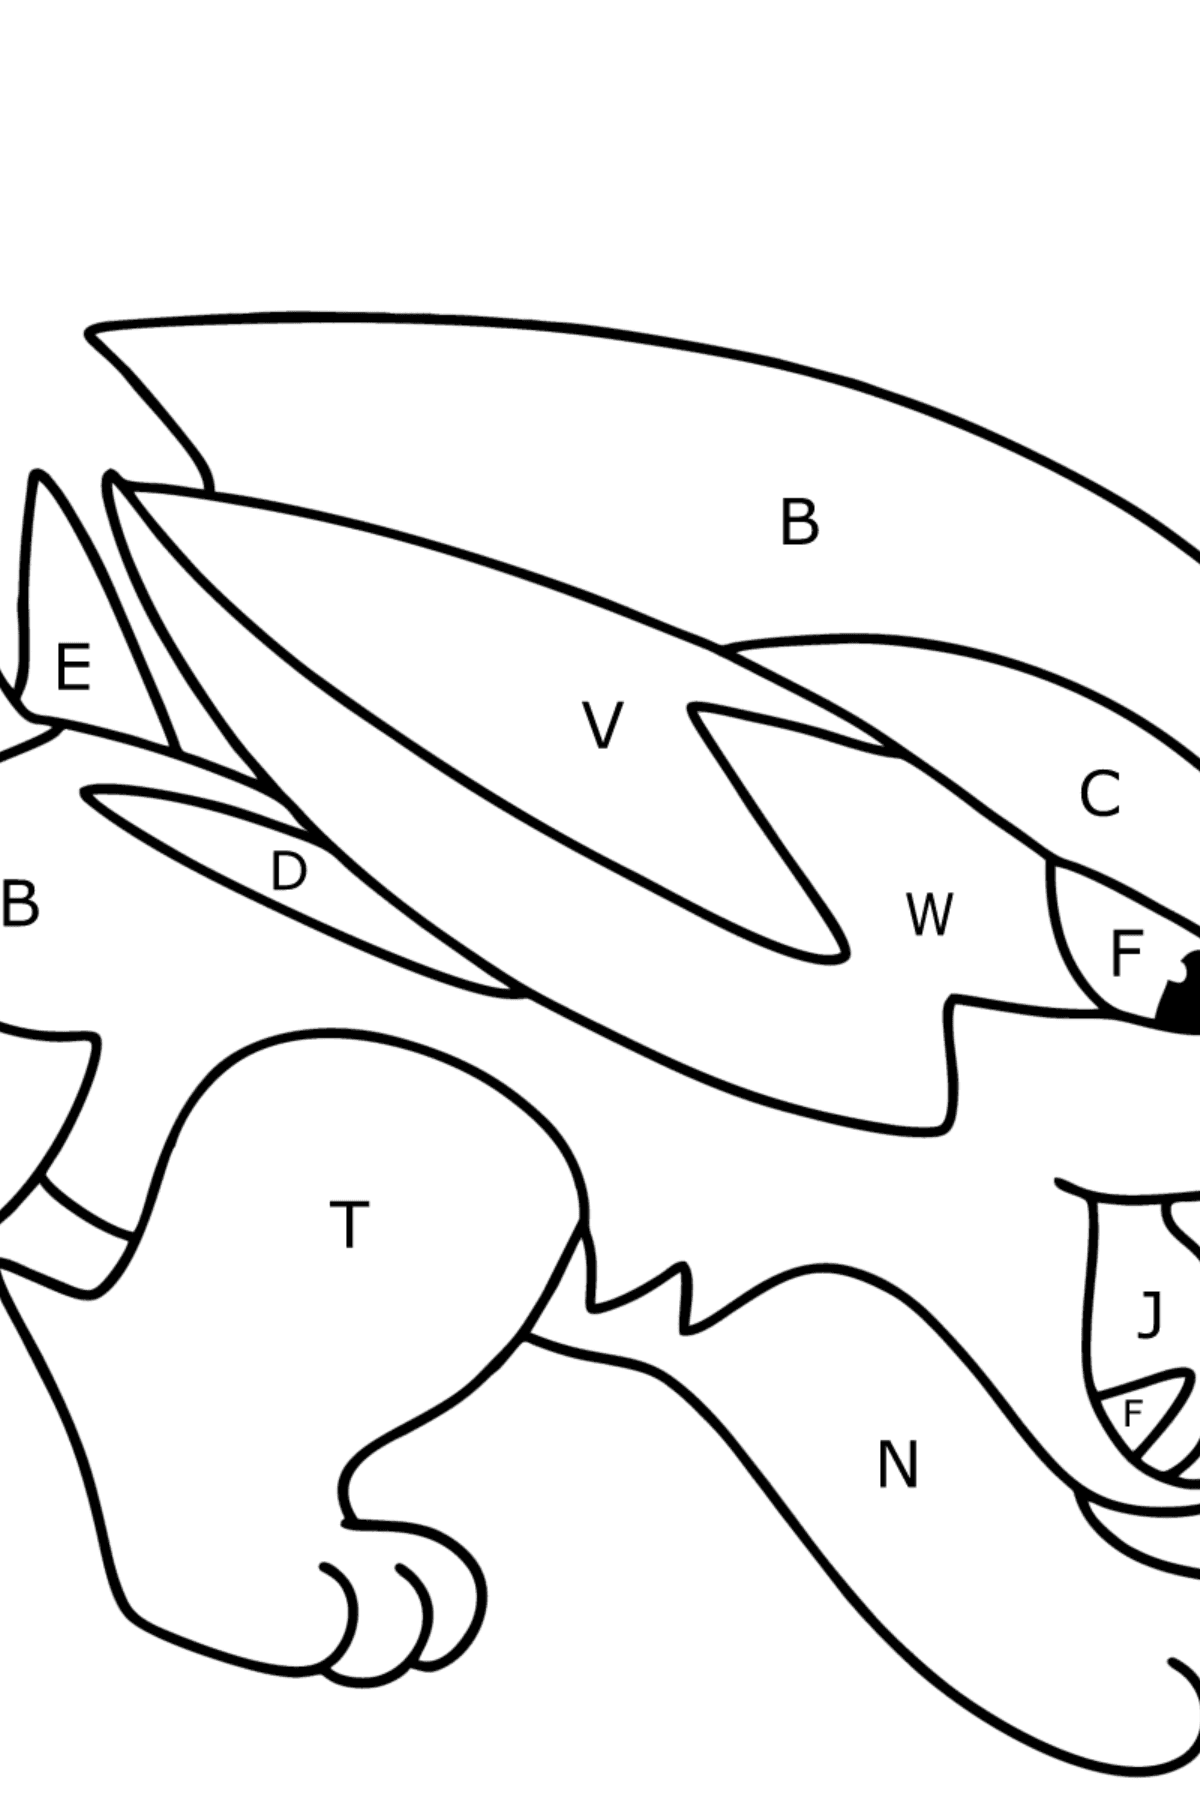 Colouring page Pokémon X and Y Electrike - Coloring by Letters for Kids